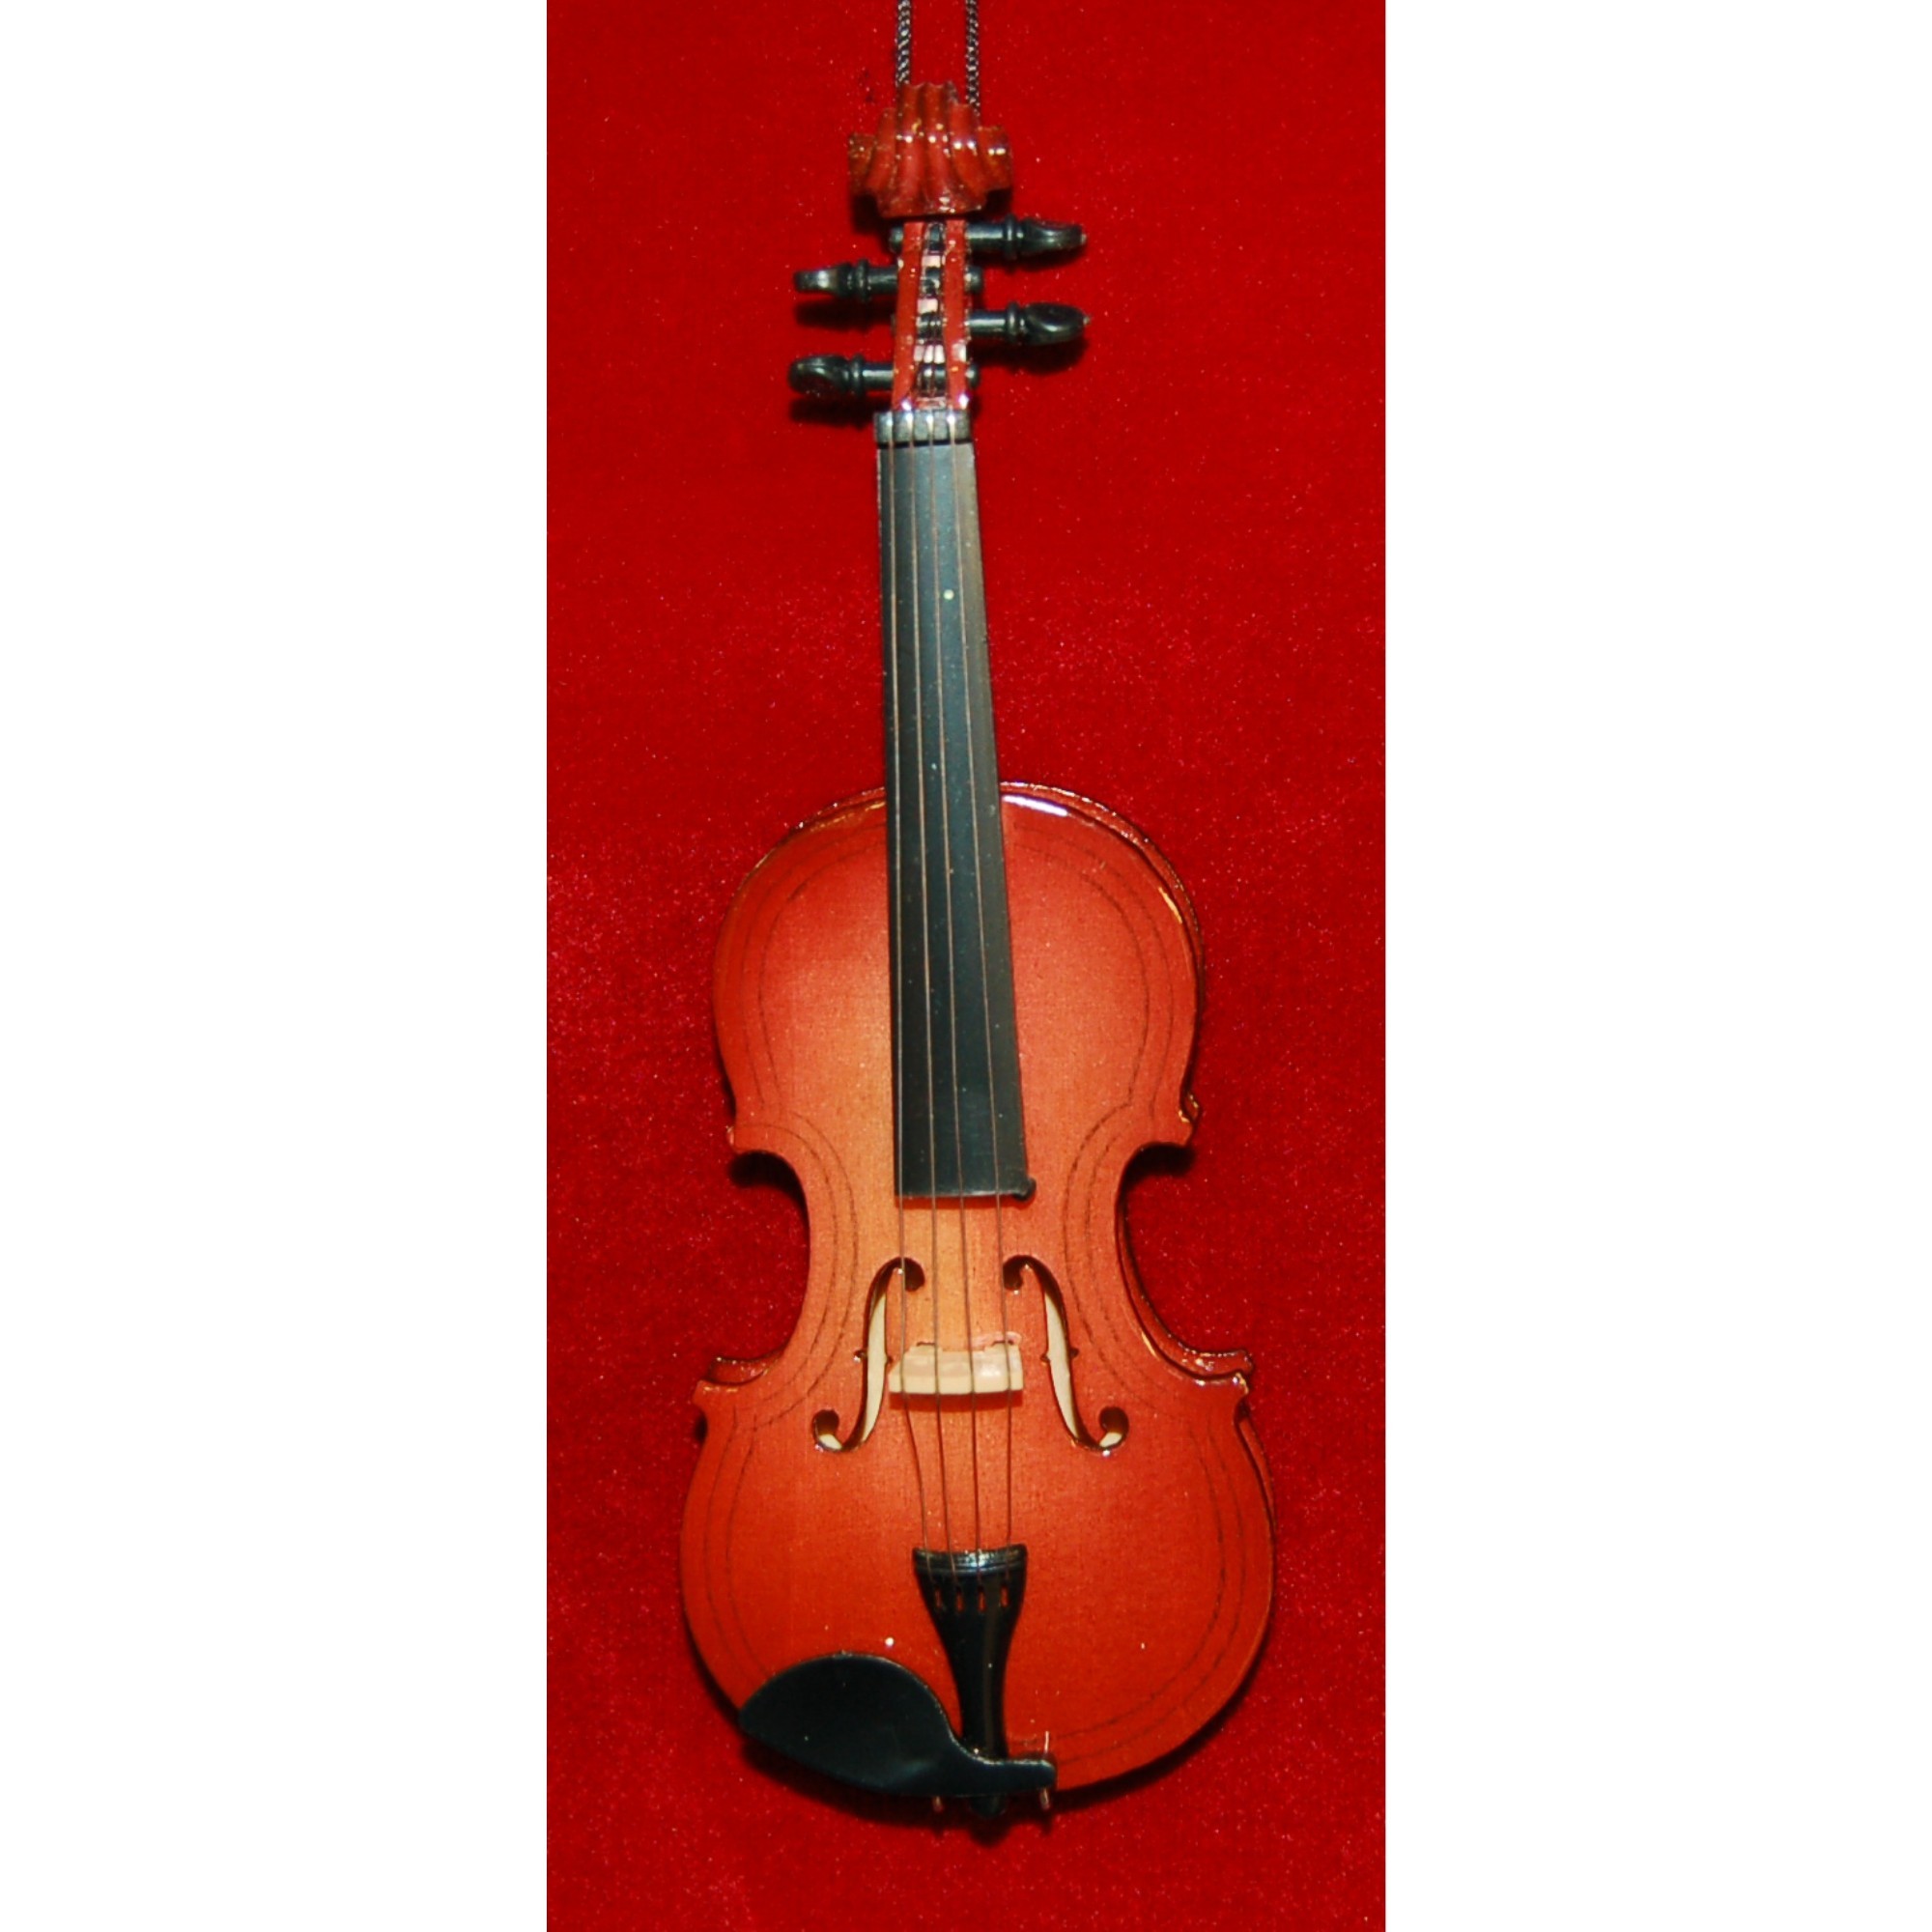 Violin Hand Crafted Wood Christmas Ornament Personalized by RussellRhodes.com